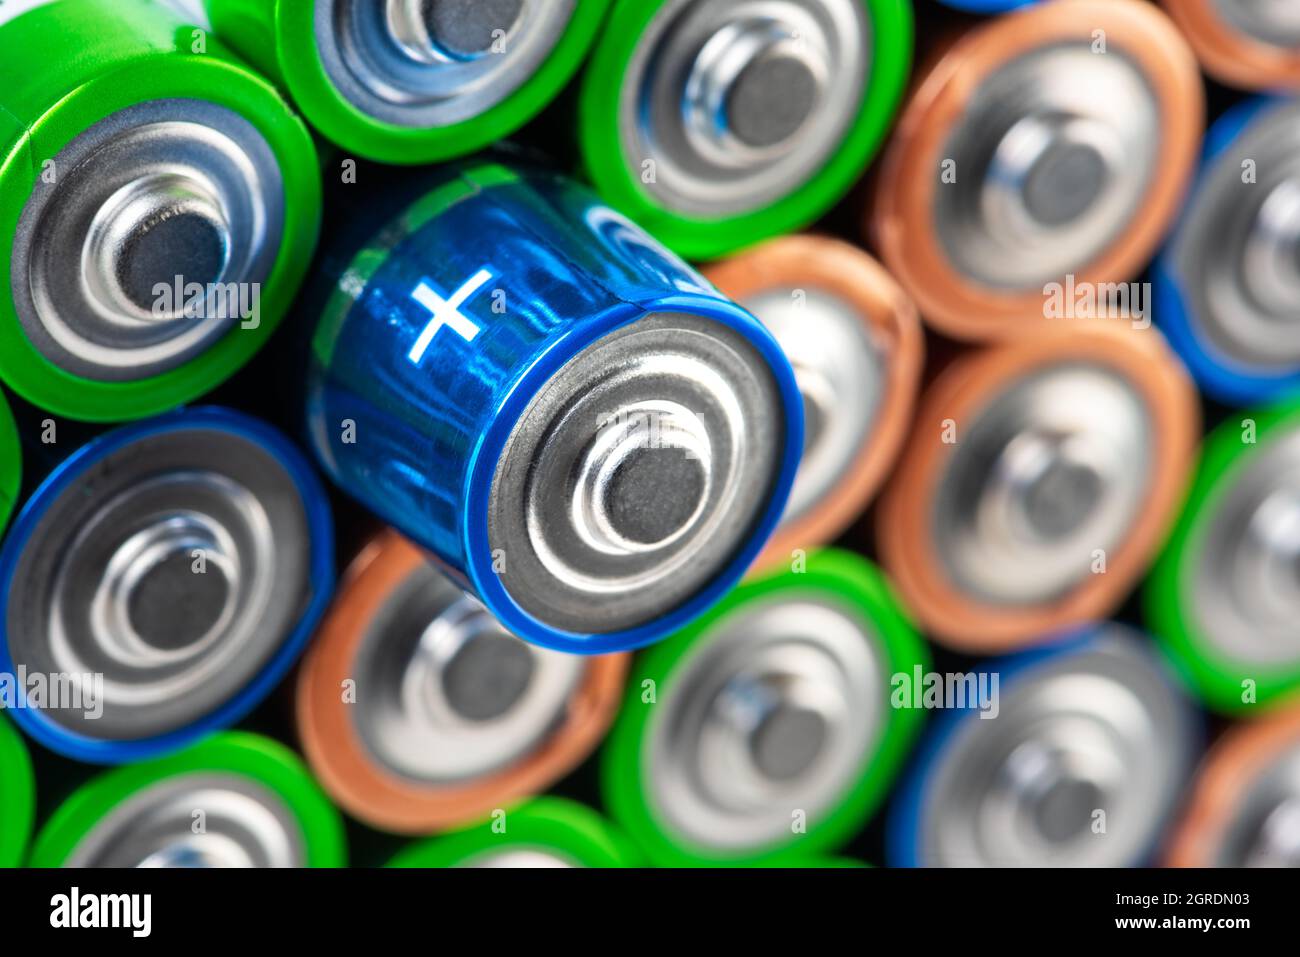 Battery AA size with selective focus on single one Stock Photo